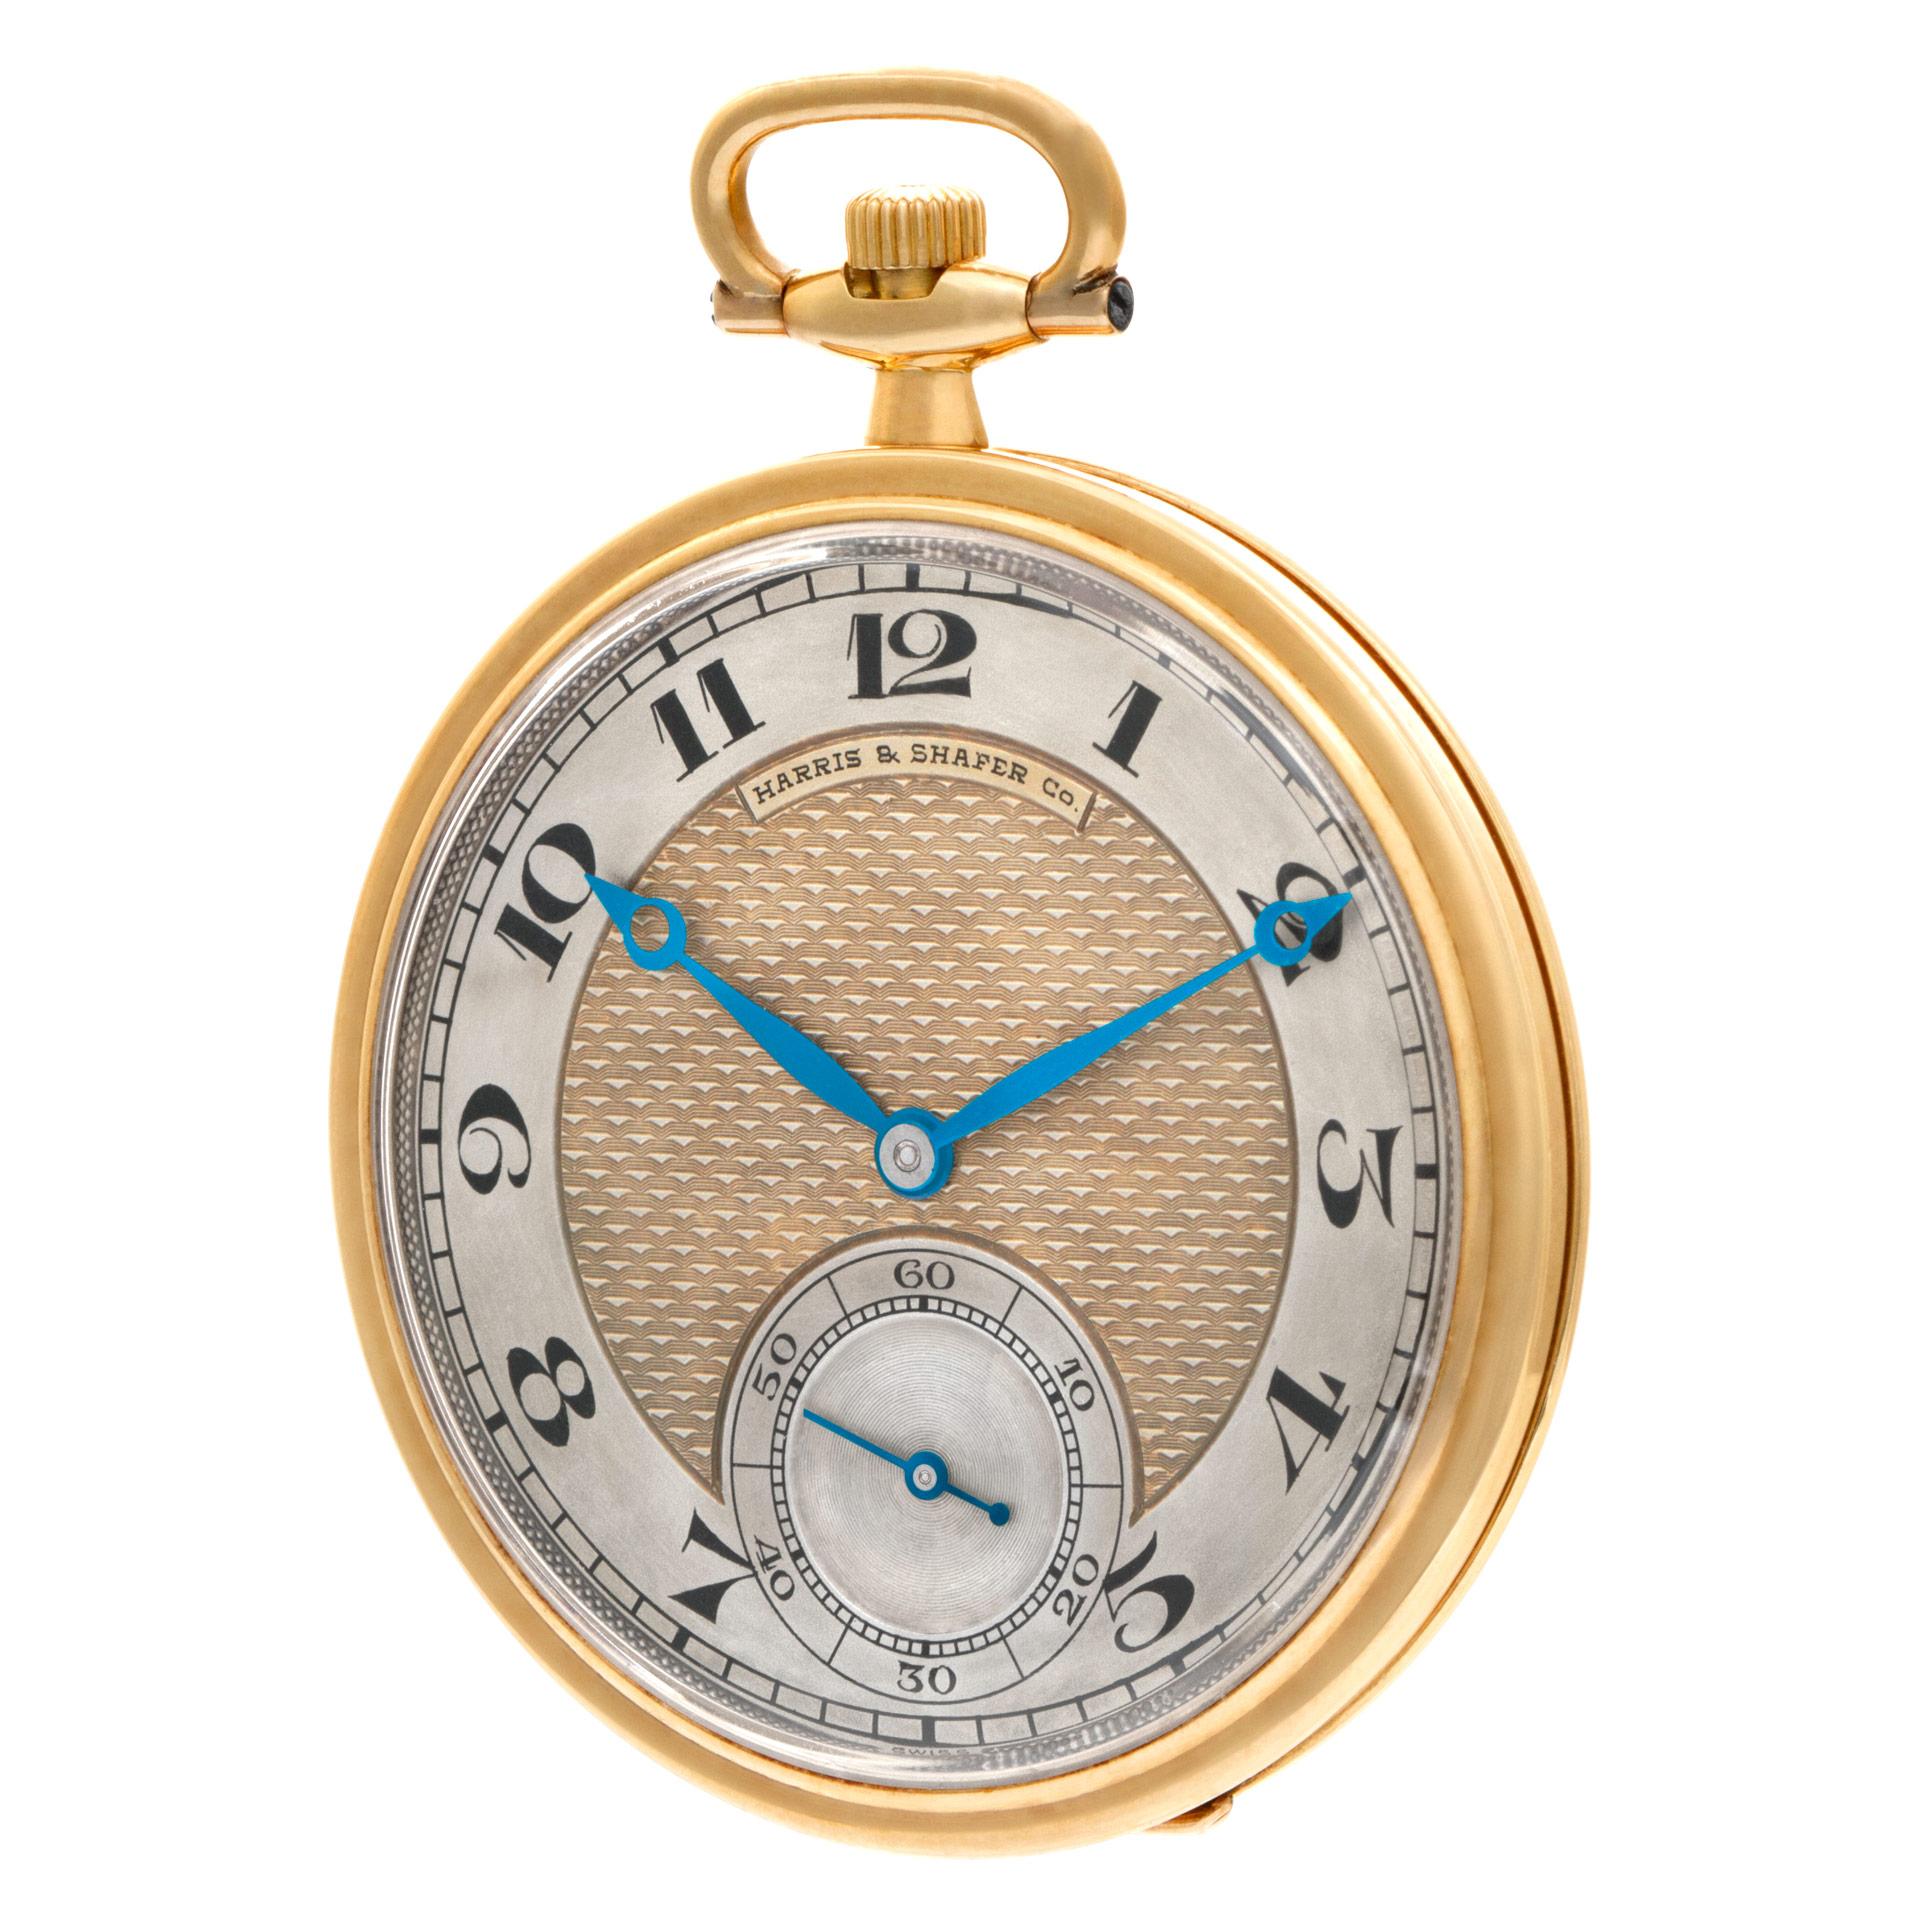 Harris & Shafer Co. by Vacheron Constantin 18k pocketwatch with fancy guilloche gold dial 18 jewels. A thin watch with Arabic black numerals and subsidiary seconds. Manual w/ subseconds. 44 mm case size. Harris & Shafer Co. retailed by Vacheron